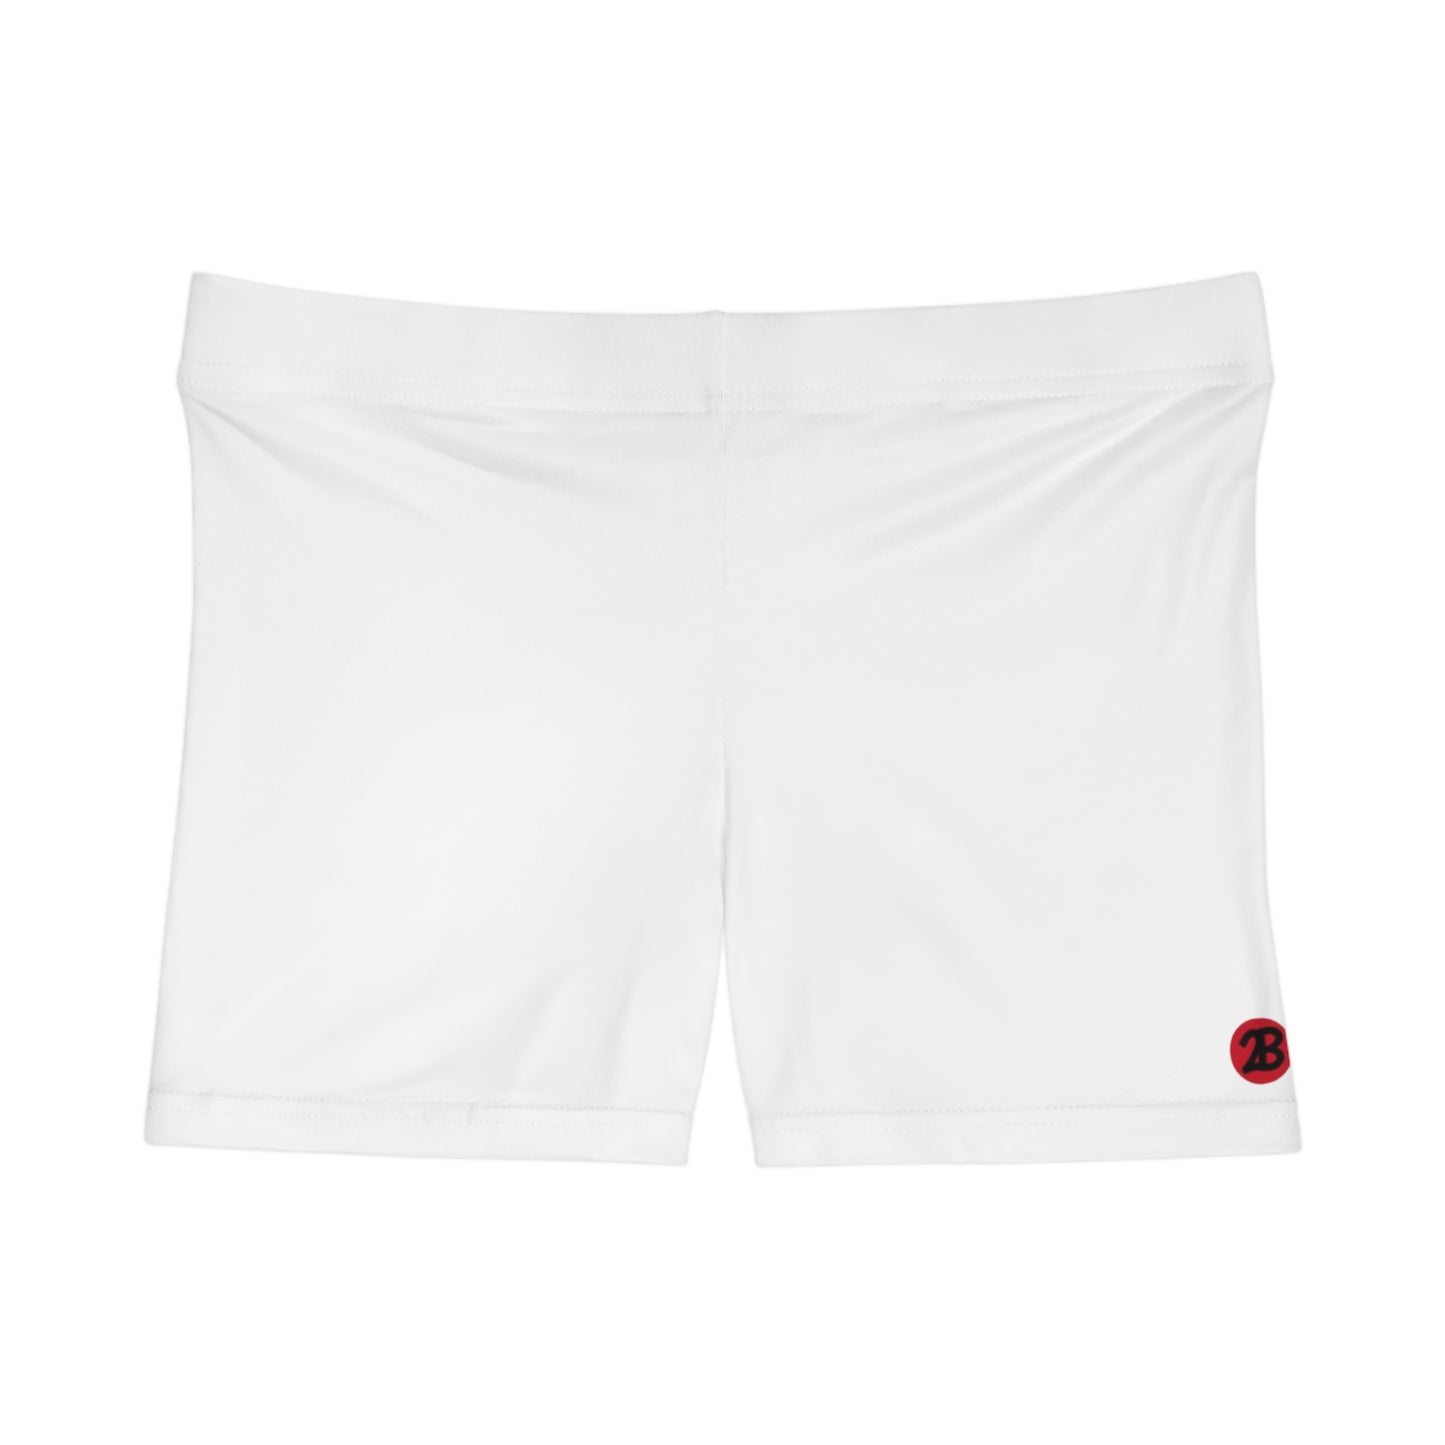 2Bdiscontinued. women's athletic shorts wht